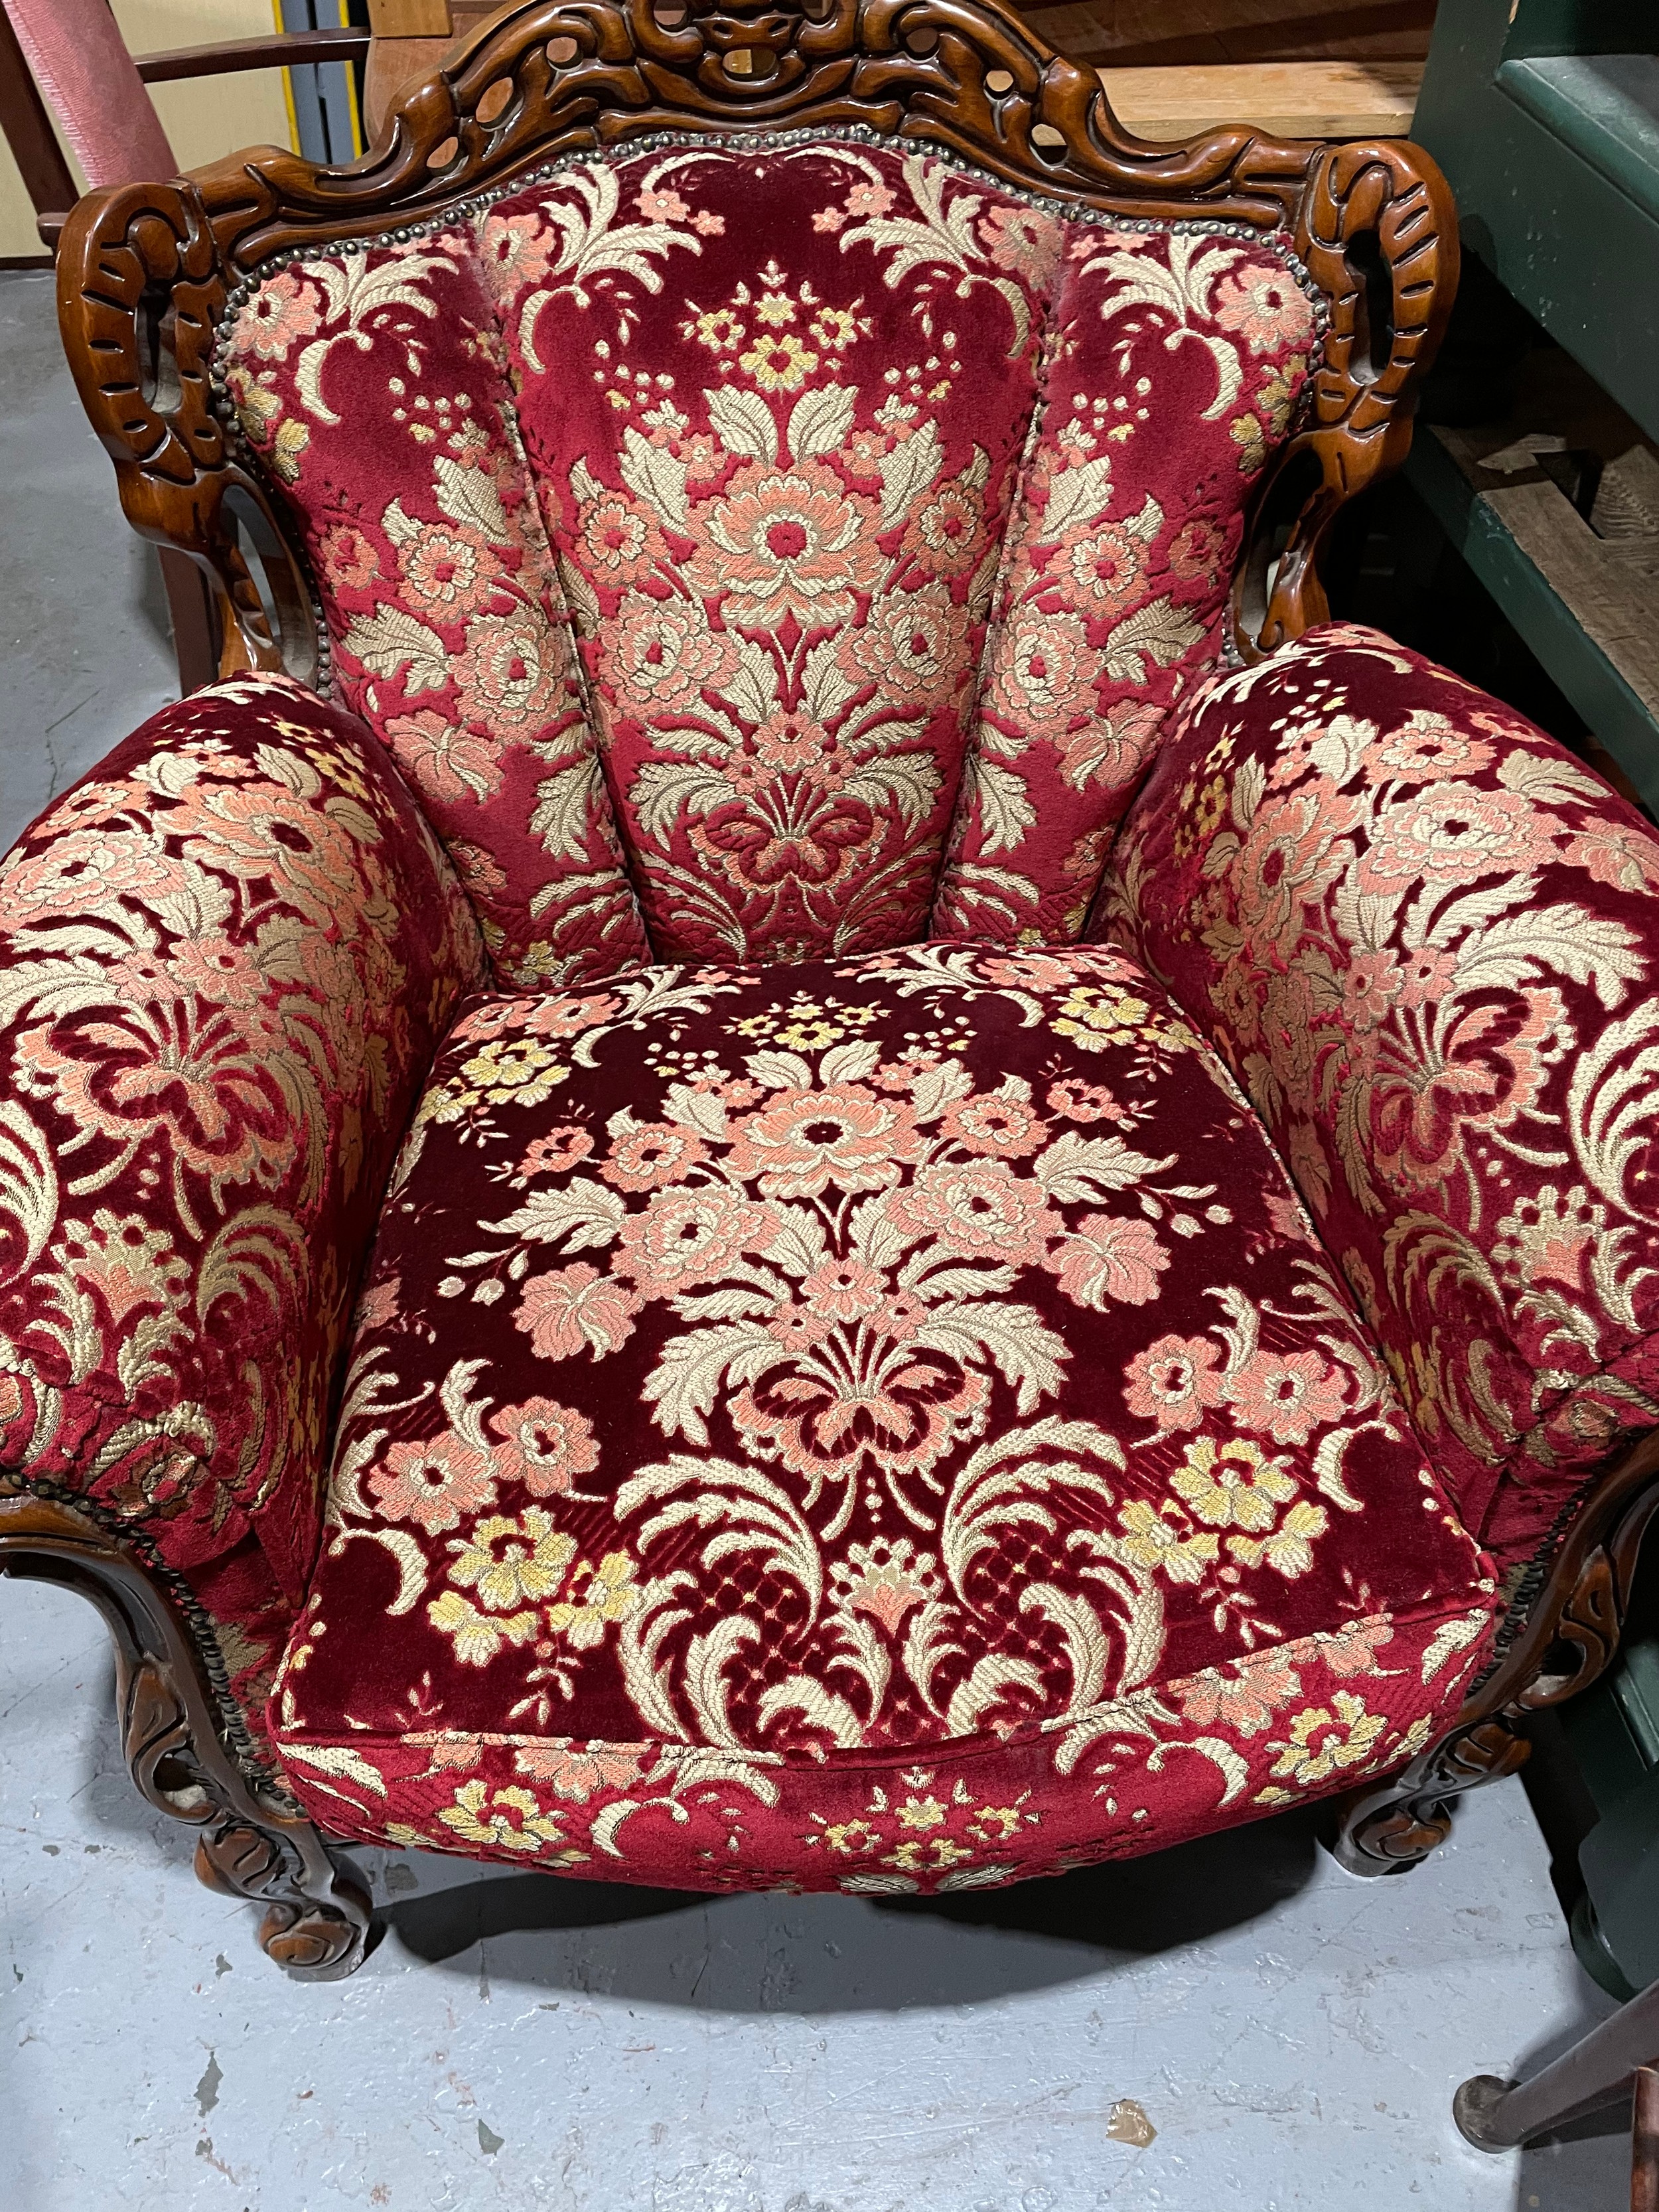 3 piece carved front room sofa set with red floral pattern - Image 3 of 3